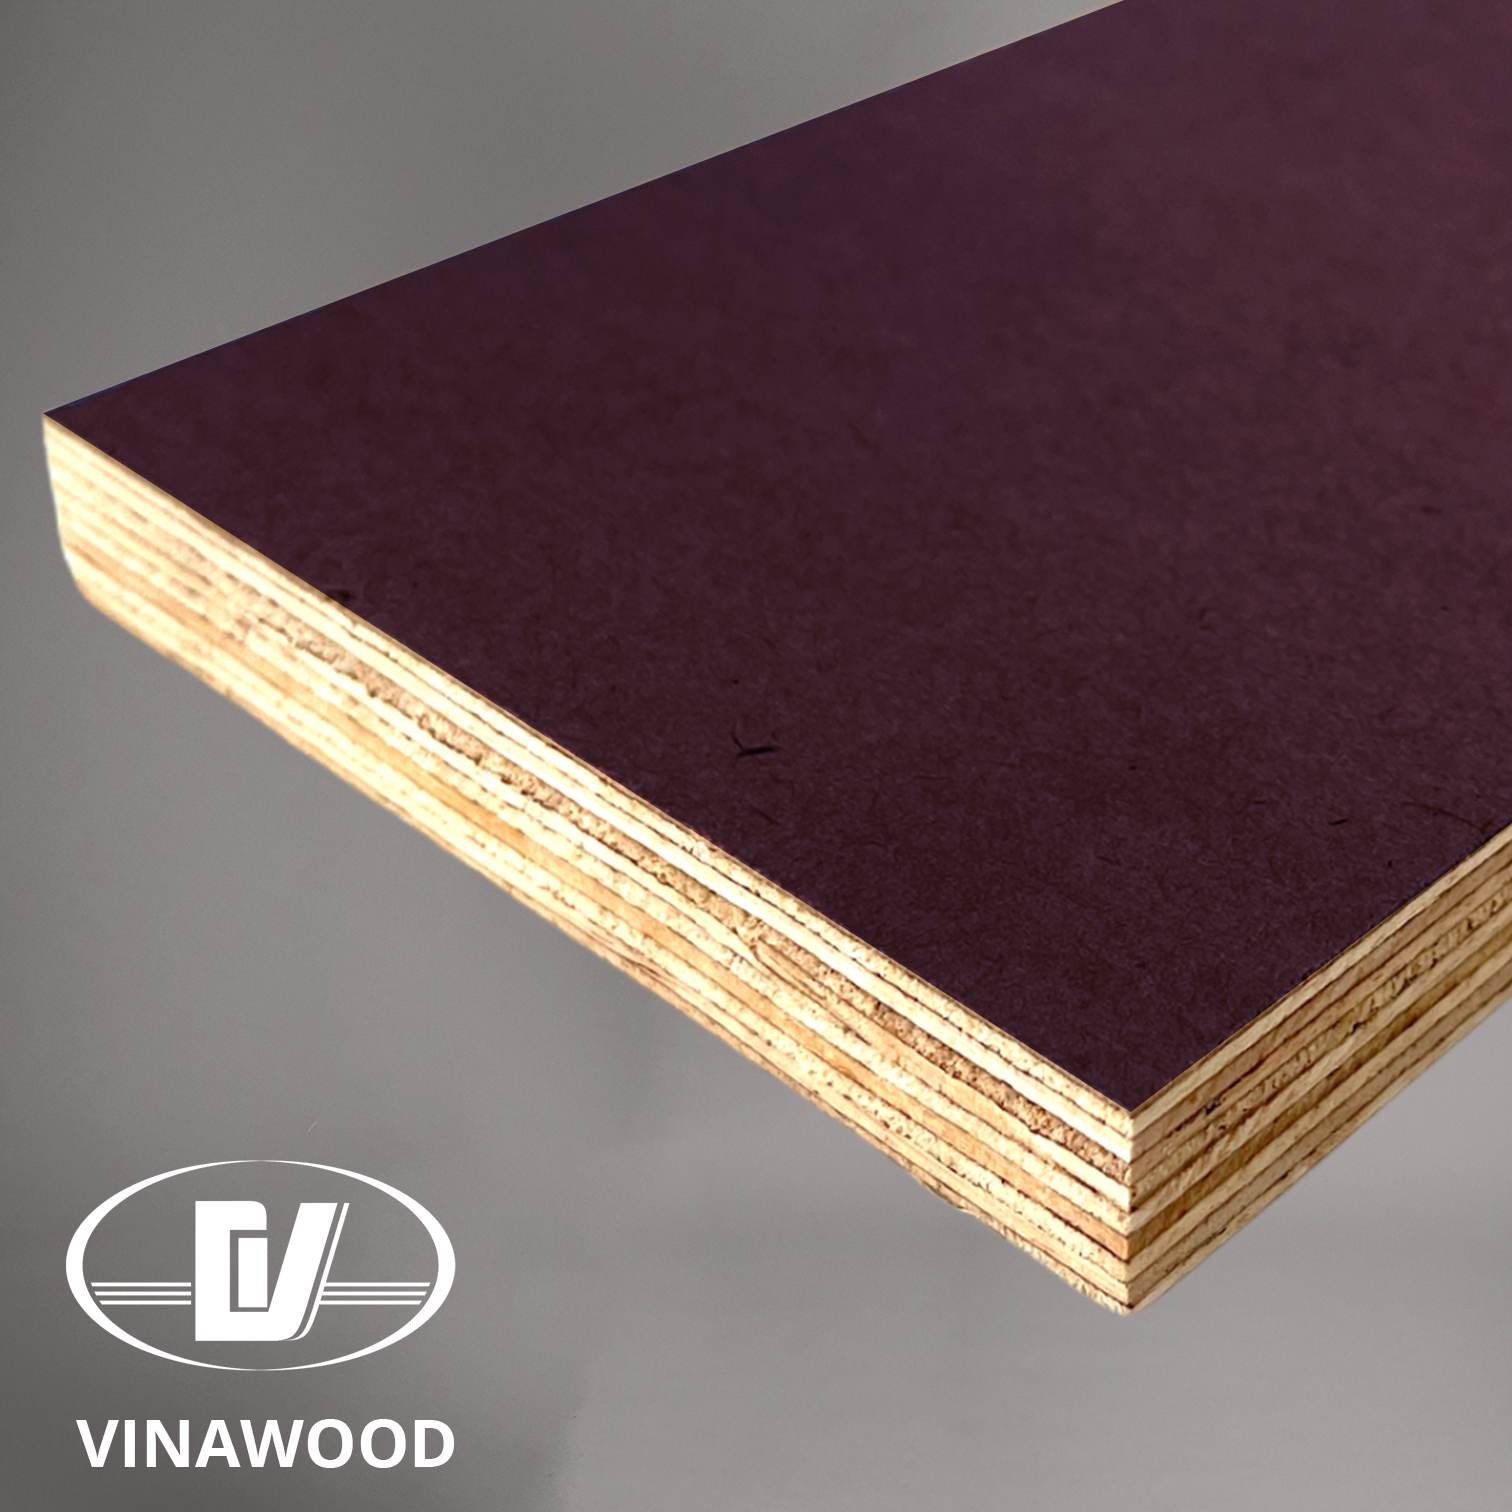 MDO 1SF Panel with Film backer - High Density - Purple color - MDO Plywood